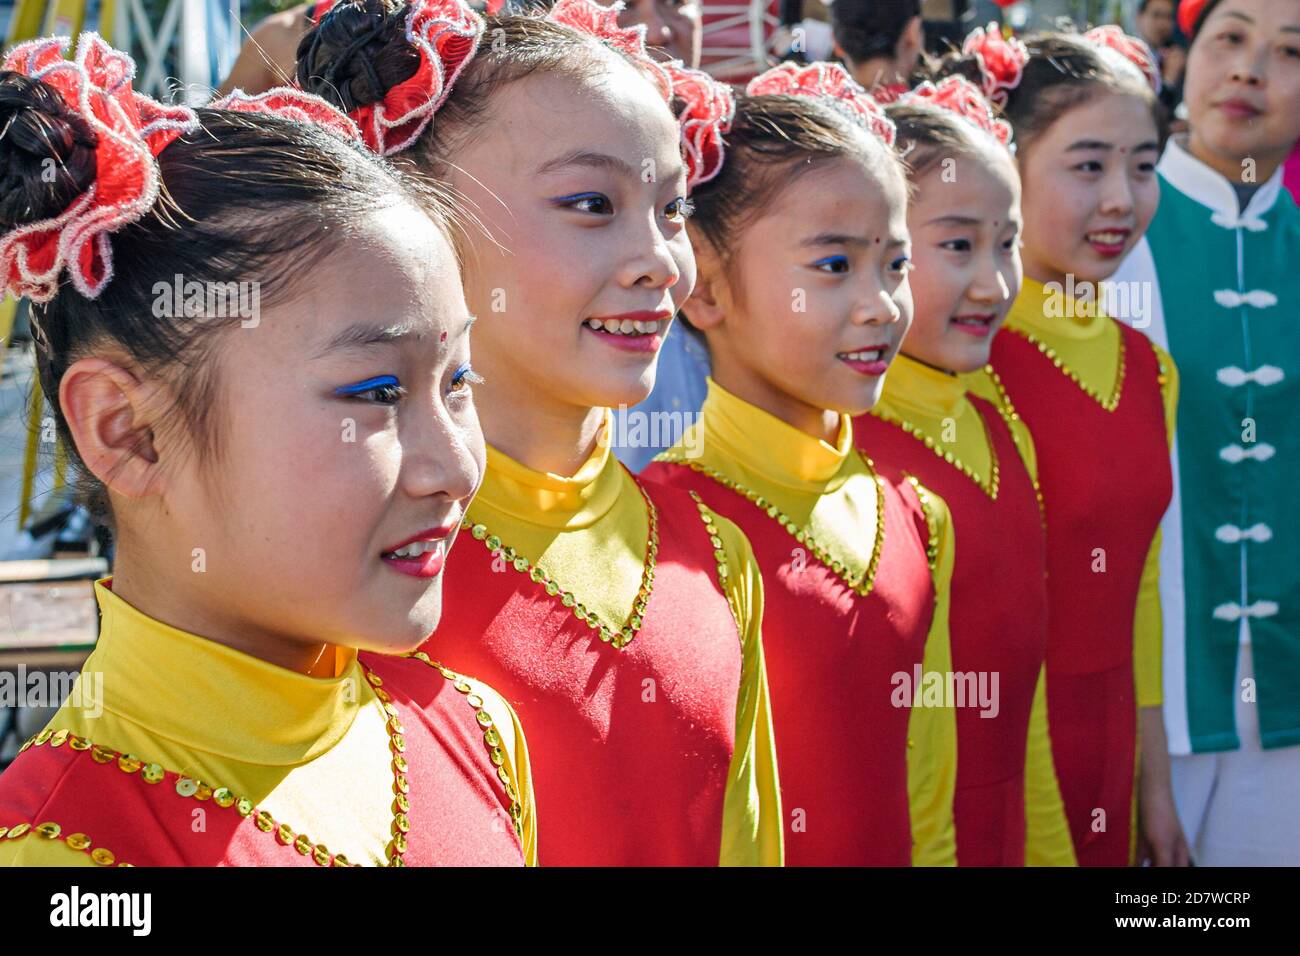 Florida Kendall Miami Dade College Chinese New Year Festival,performers Asian girl girls outfit costume costumes gymnasts acrobats, Stock Photo